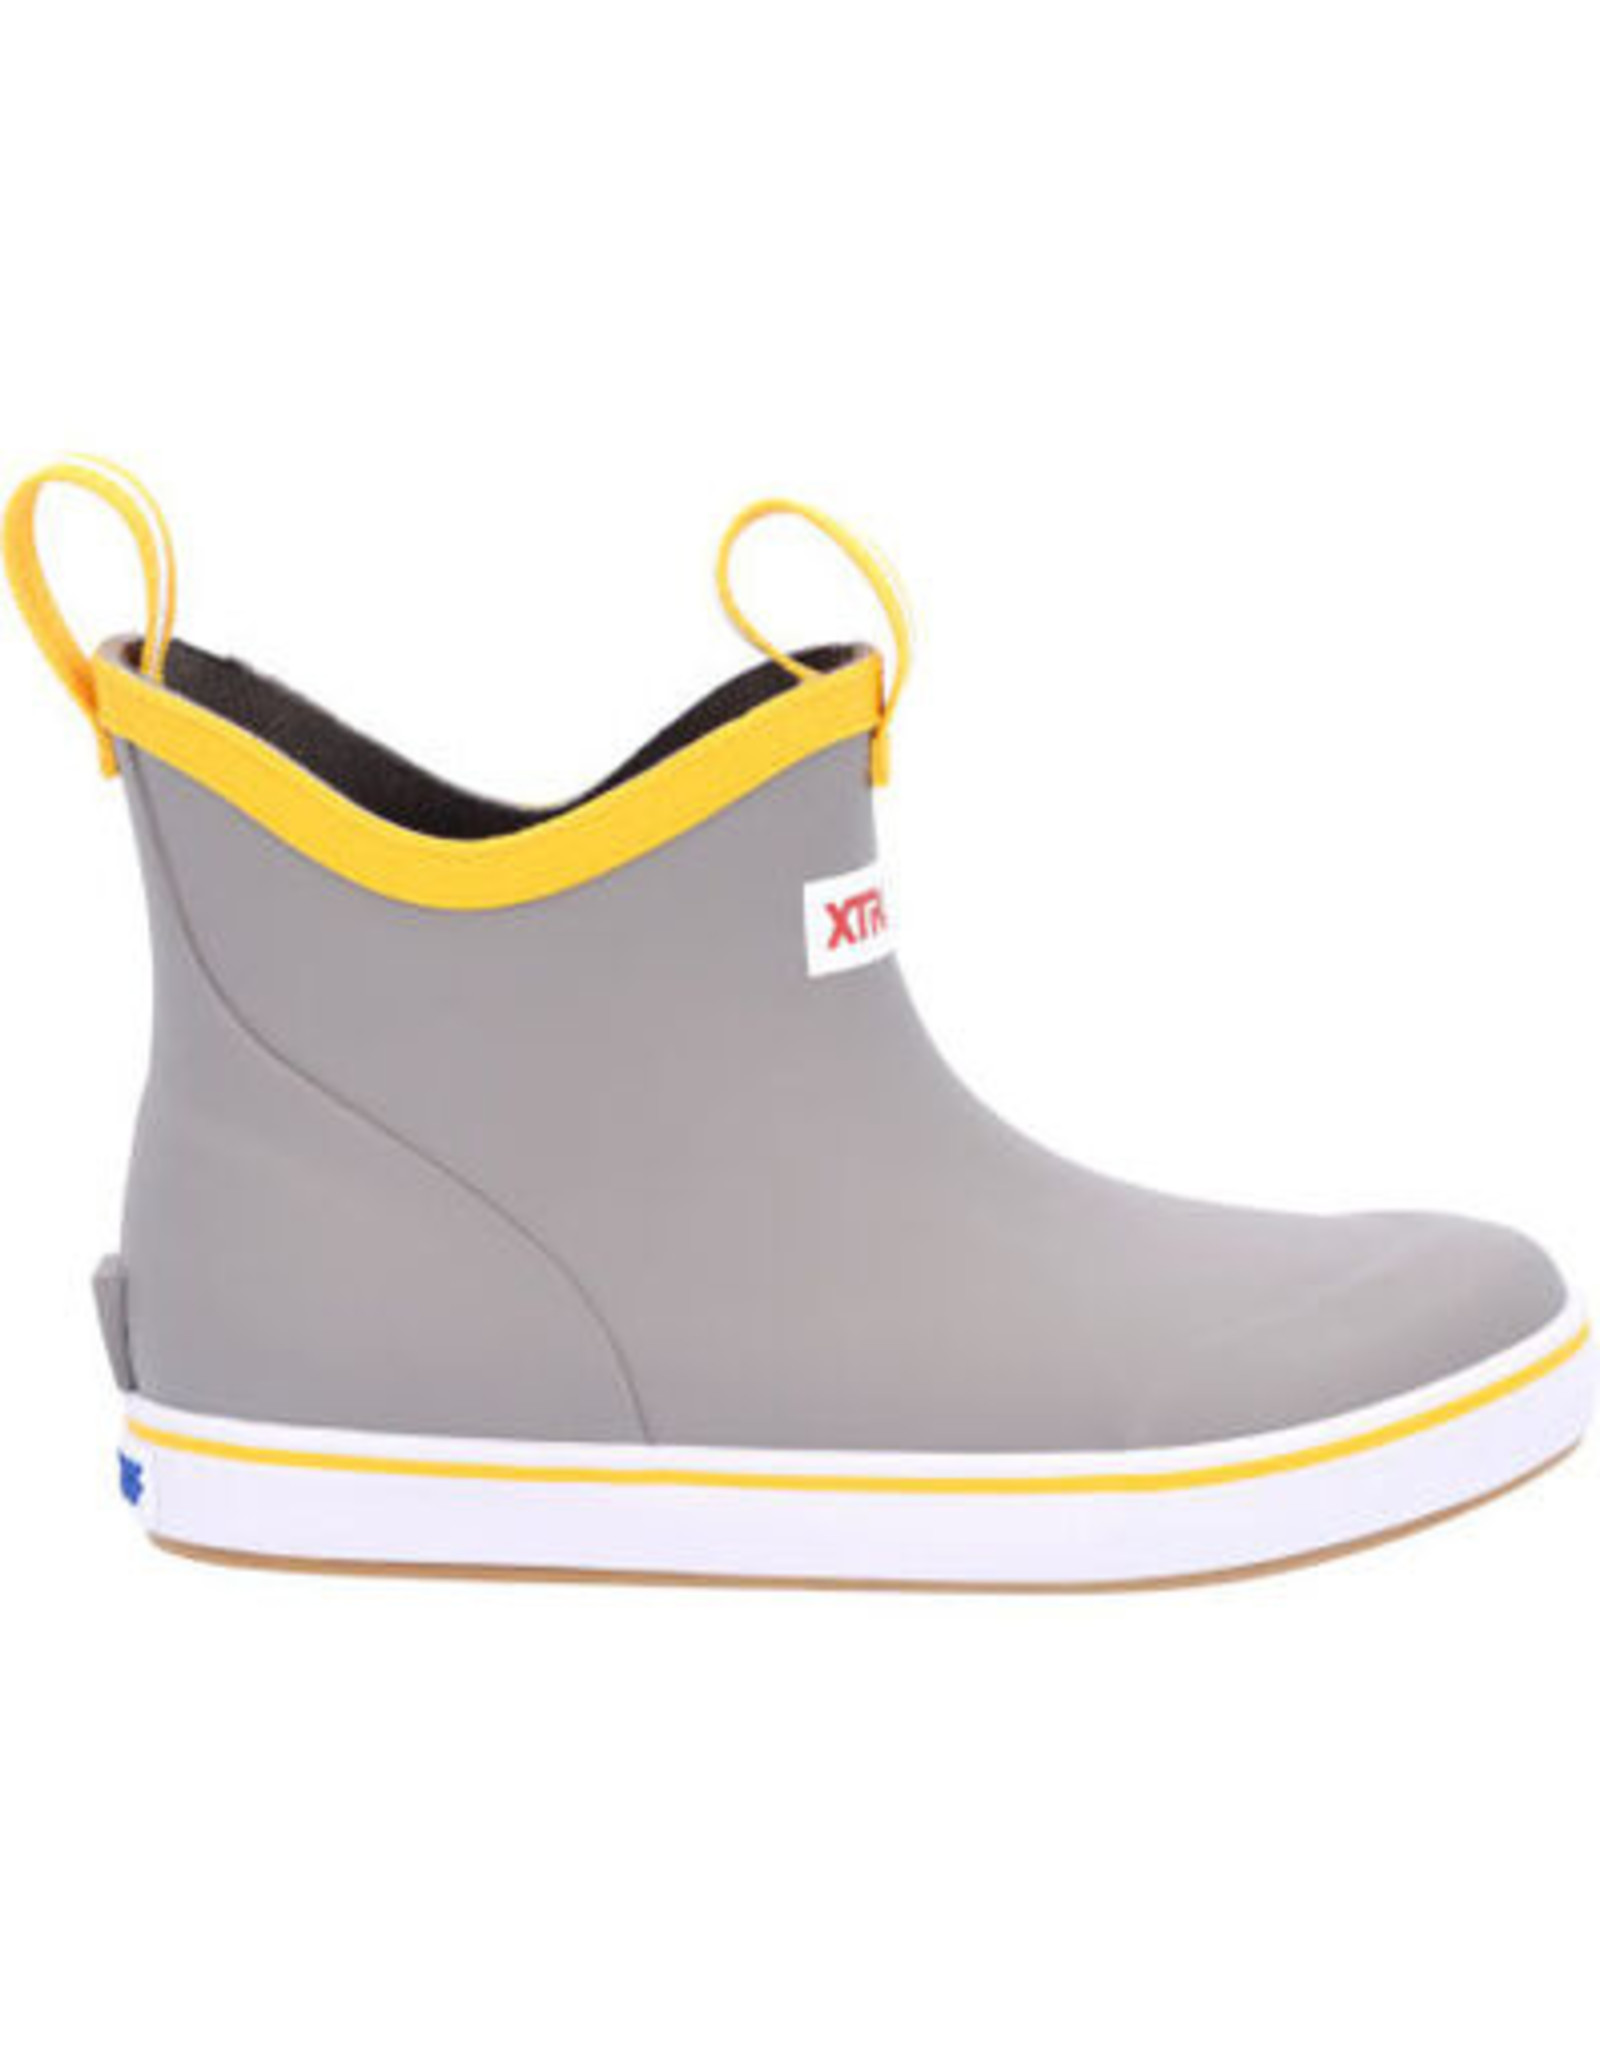 XTRATUF KIDS ANKLE DECK BOOT-GRAY/YELLOW